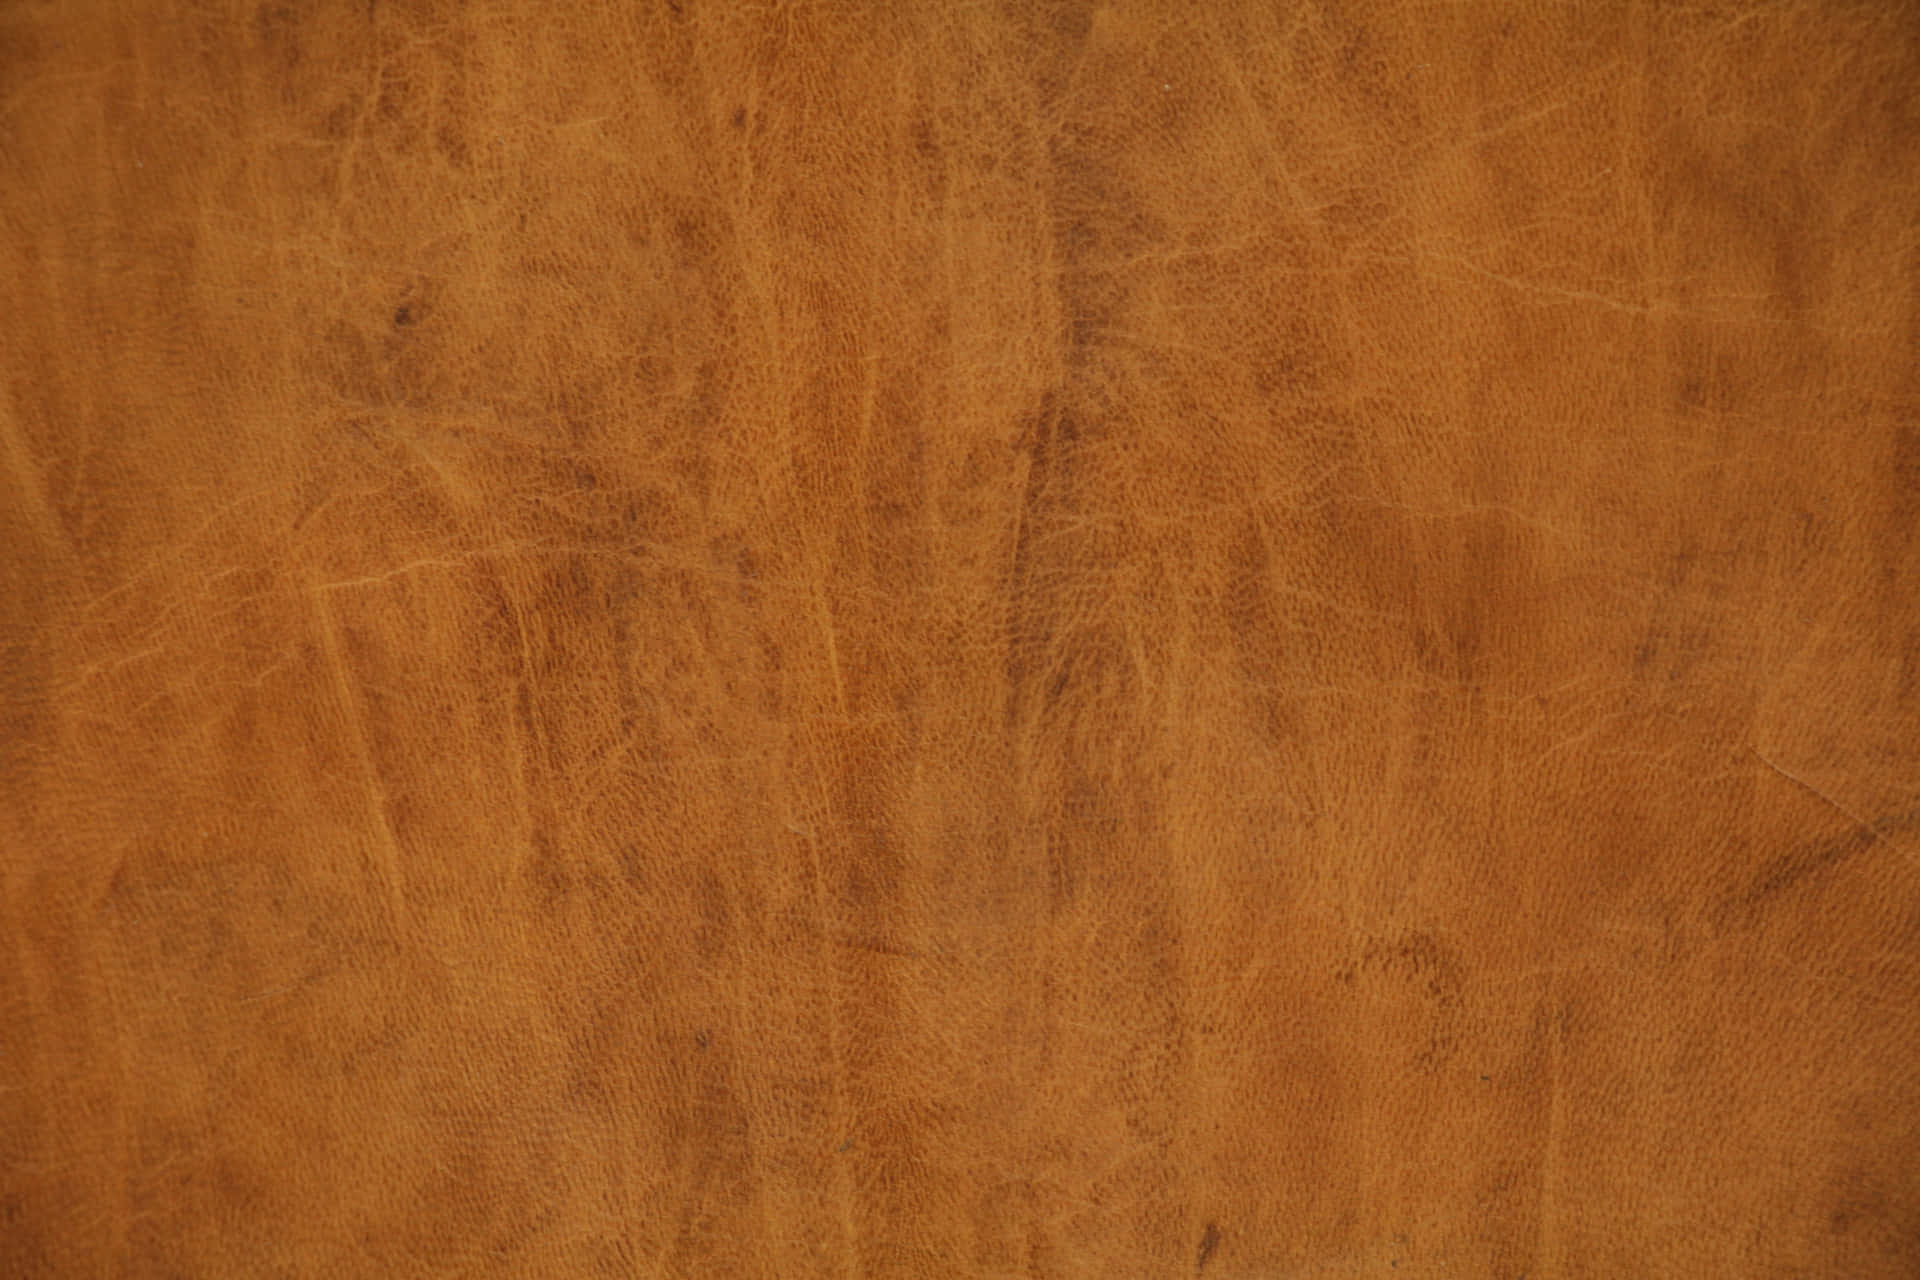 Leather Texture Faded Lines Wallpaper